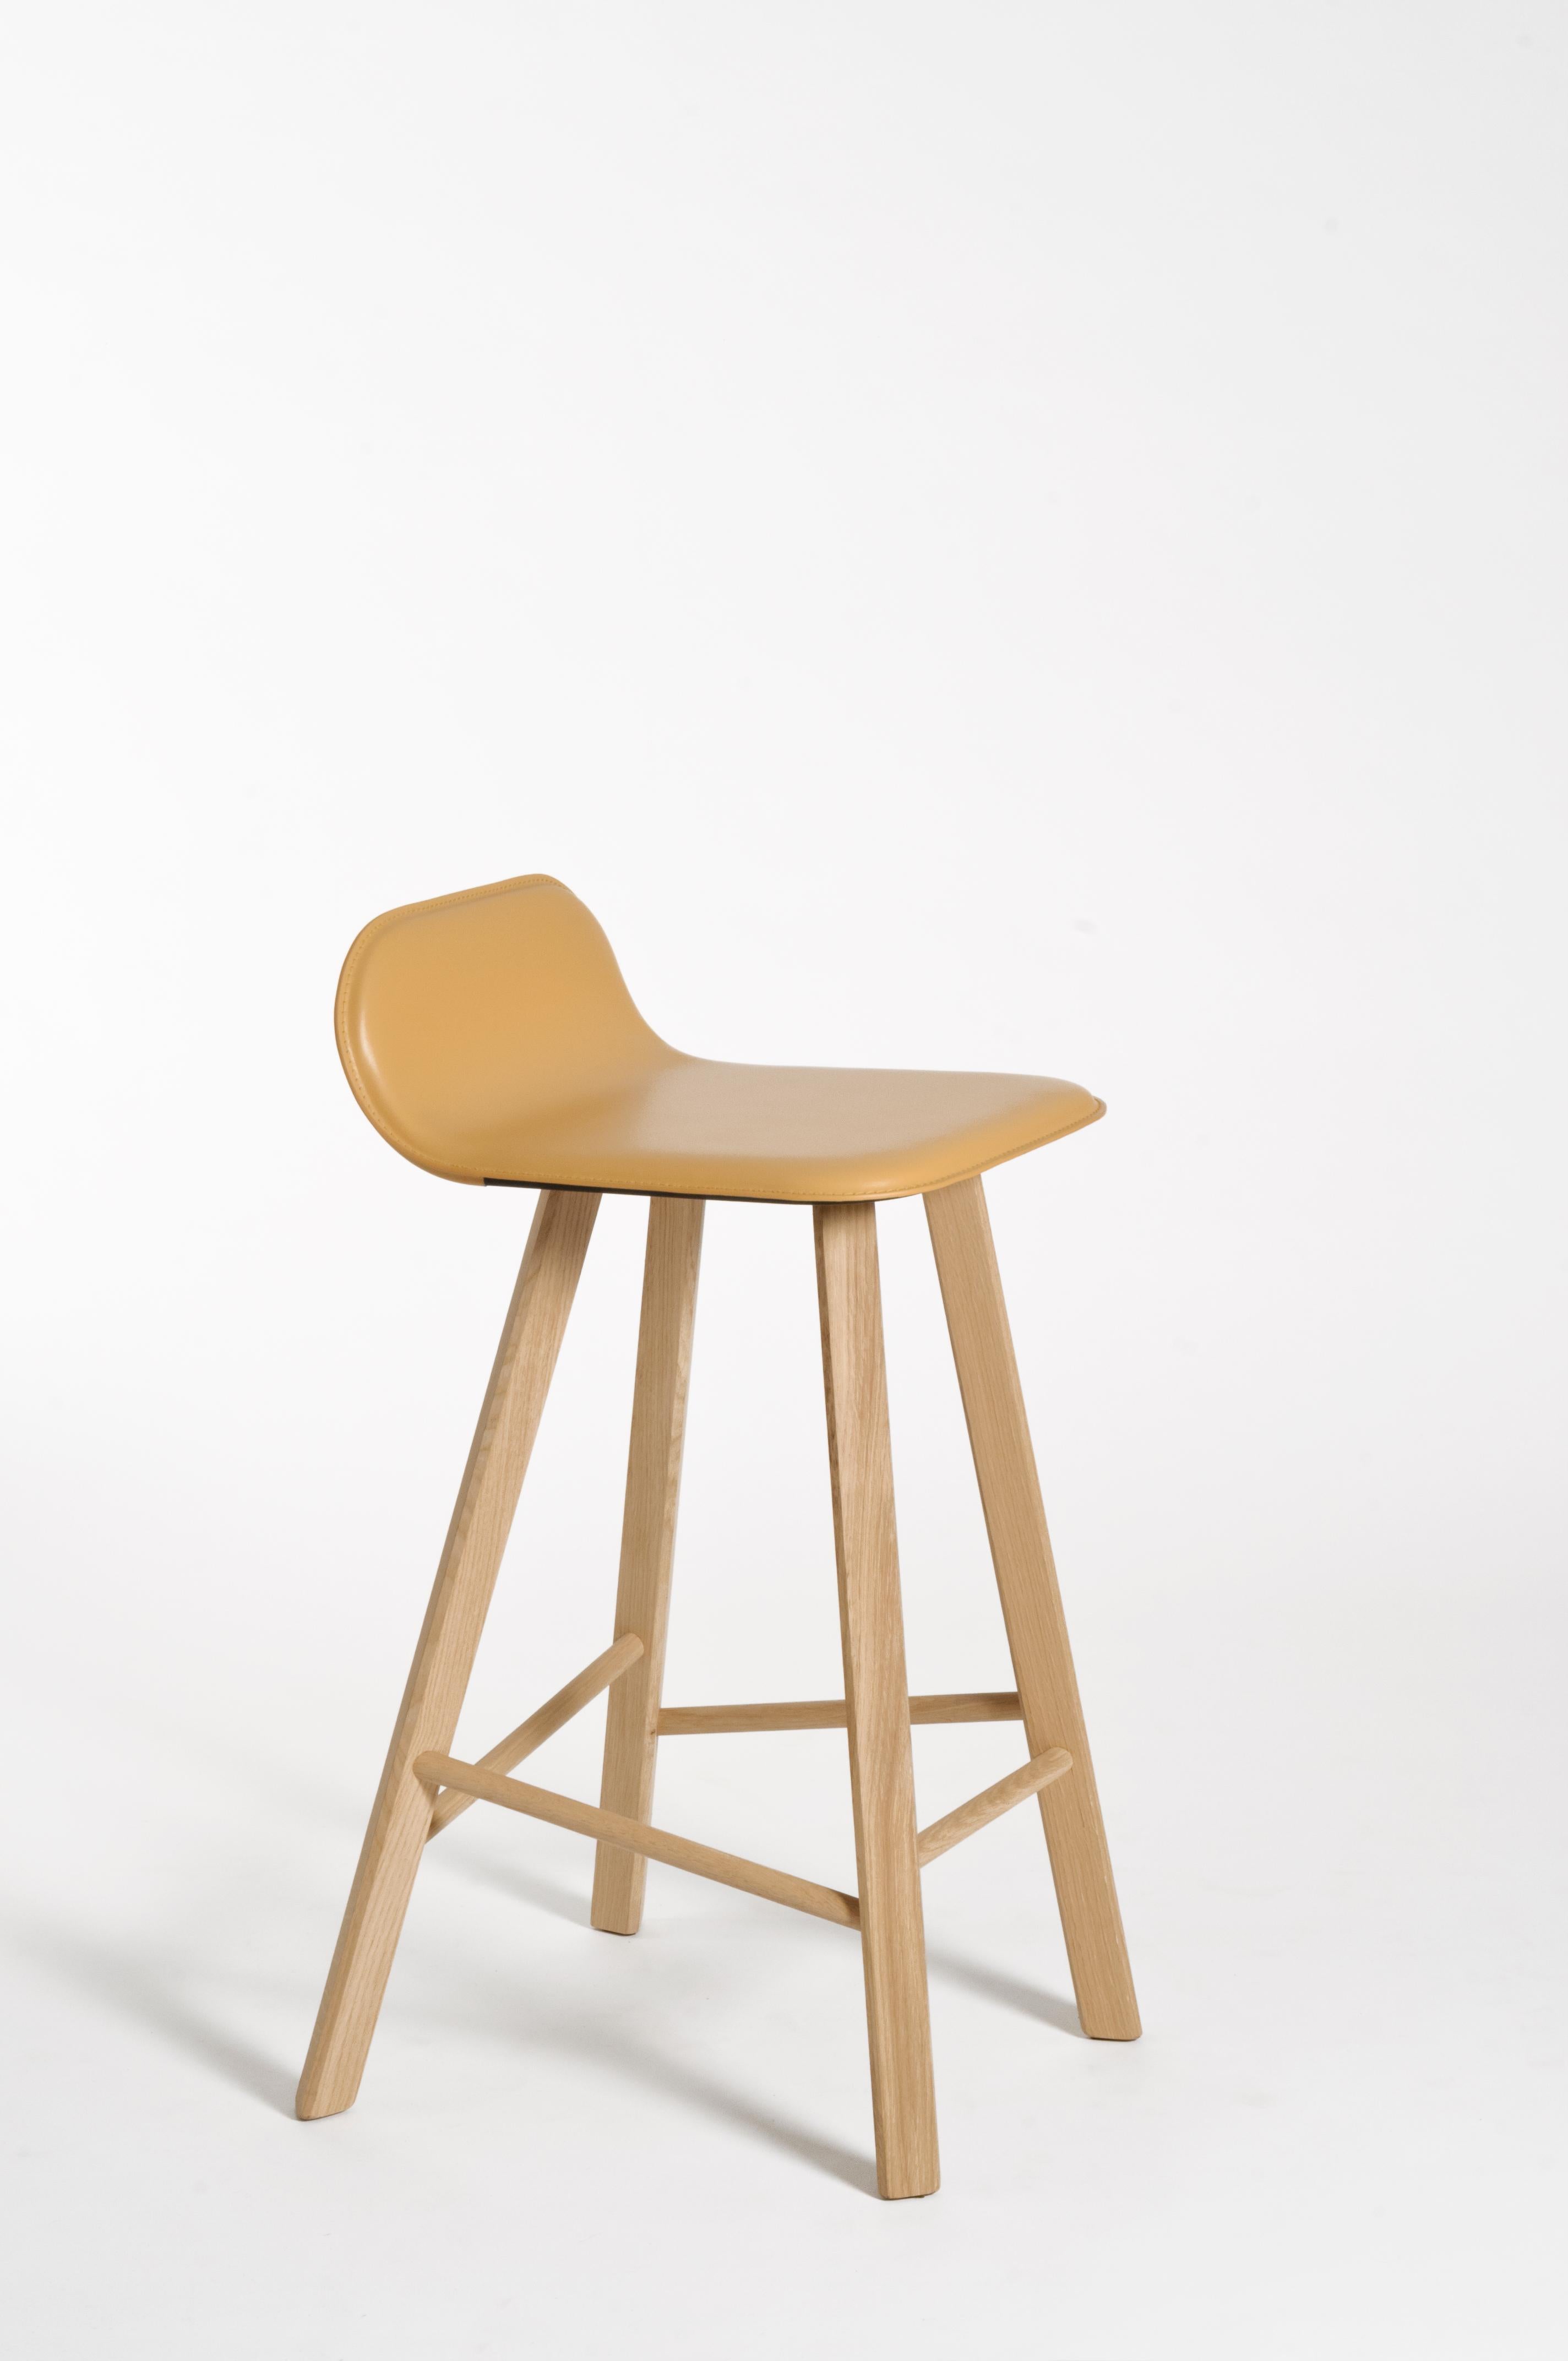 Essential and elegant stool with a bent plywood shell upholstered in leather. and four iconic legs with triangular shape in solid oak, joined by transversal wooden bars. The seat can have a low back as listed, or an high back as a normal chair for a